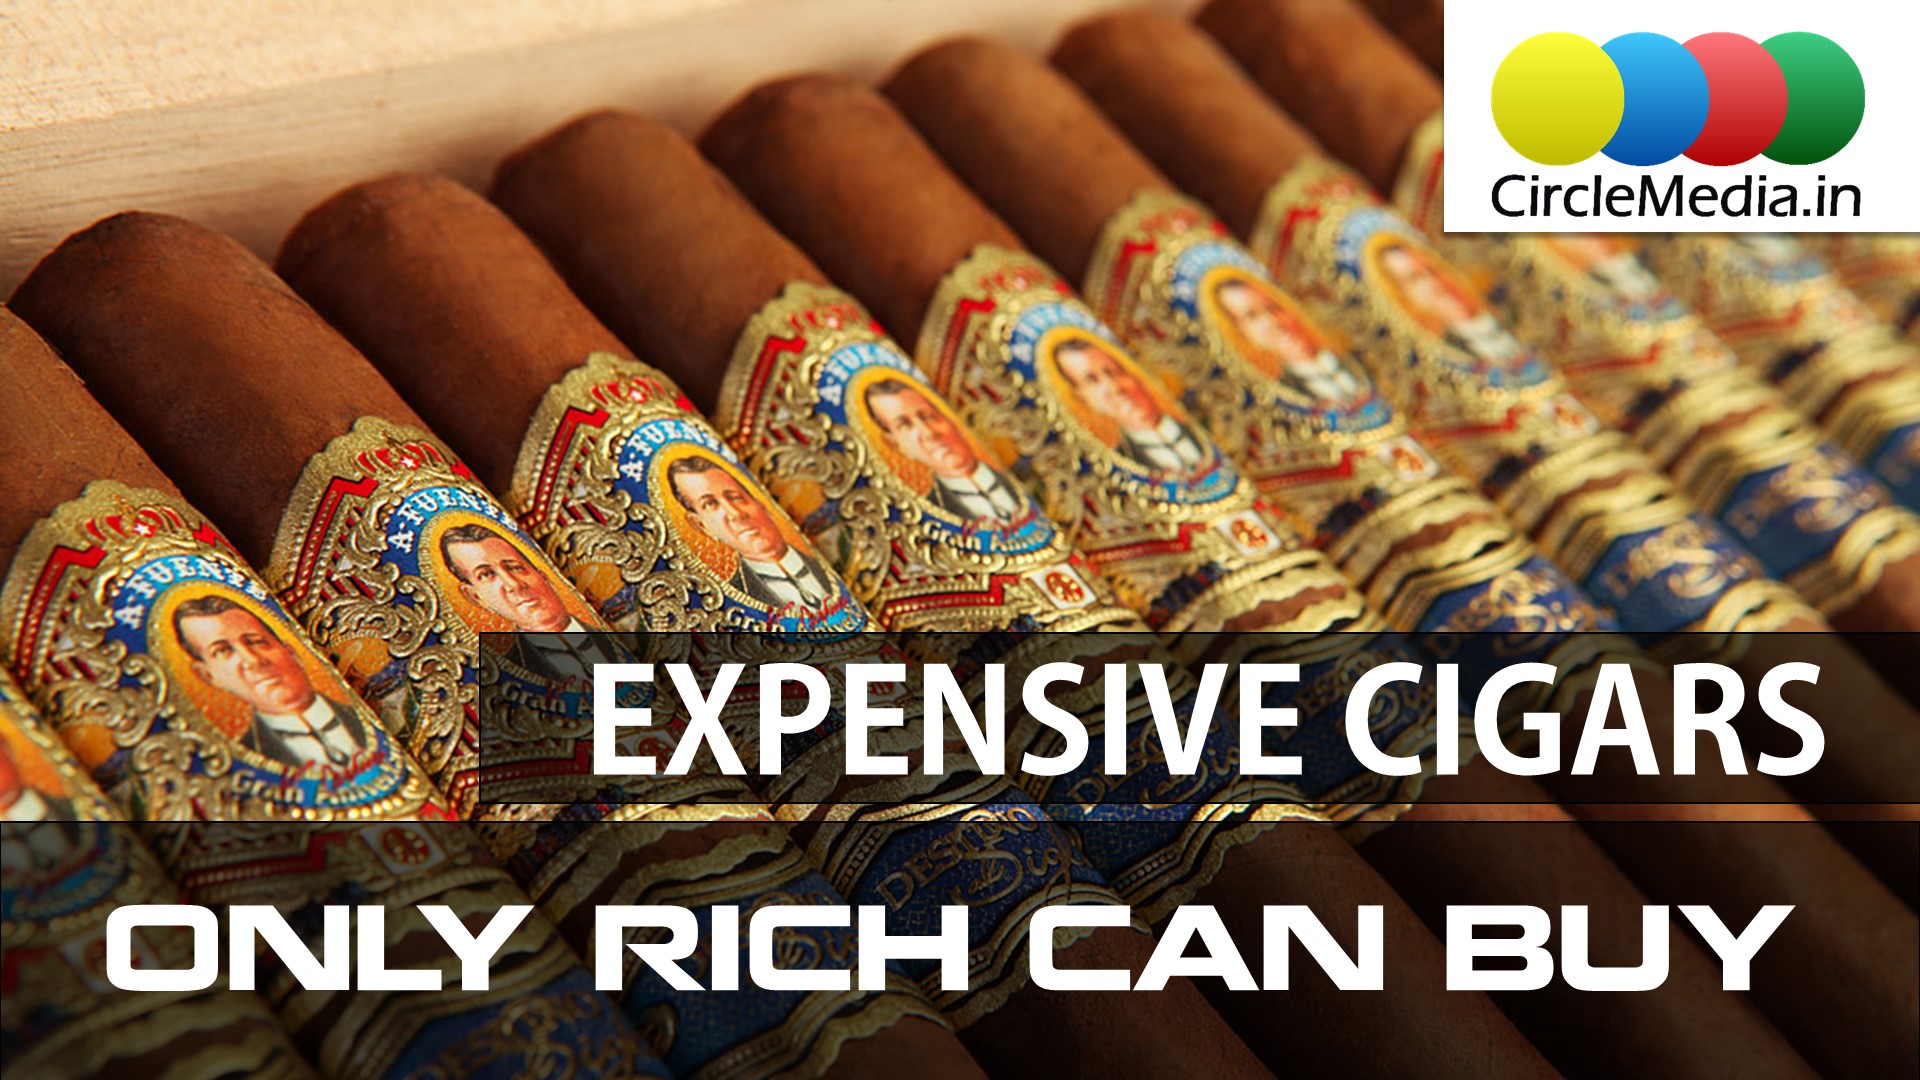 10 Expensive Cigars Only the Rich Can Buy | Smoking Injurious to Health | CircleMedia.in